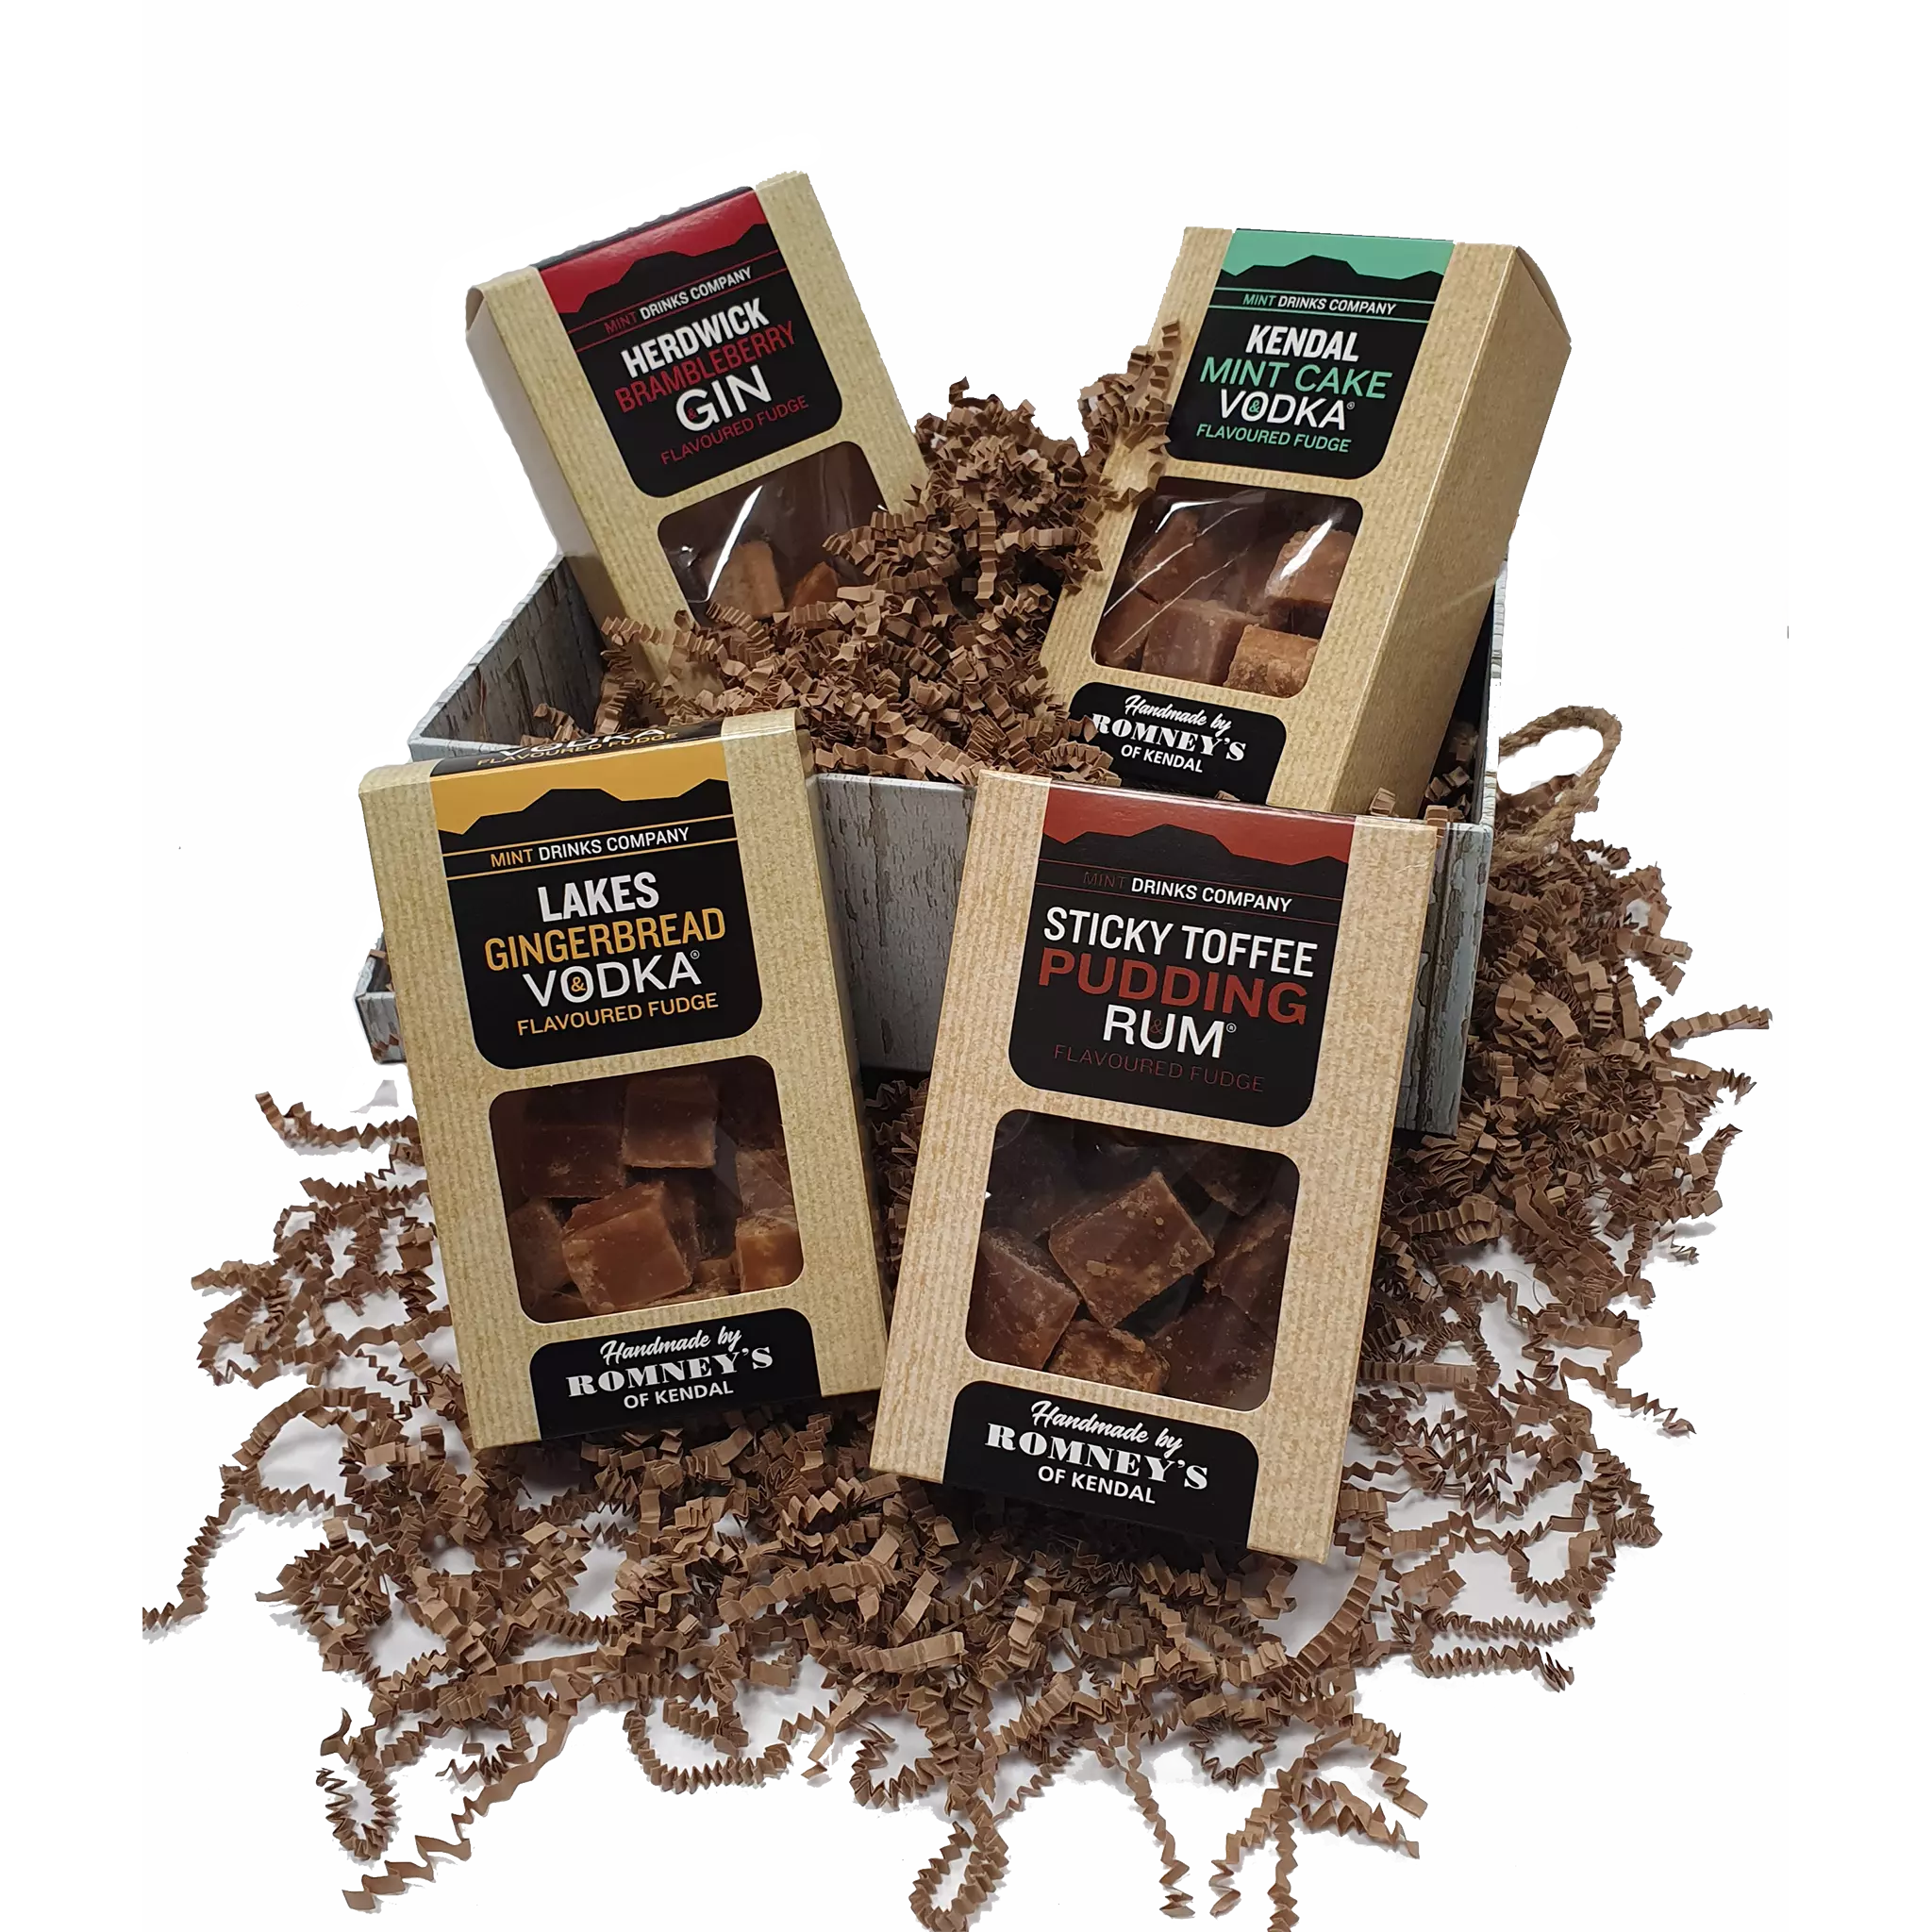 An open whitewash effect gift box bursting with 4 fudge boxes. The fudge box flavours are: Herdwick Brambleberry Gin, Kendal Mint Cake Vodka, Lakes Gingerbread Vodka & Sticky Toffee Pudding Rum.